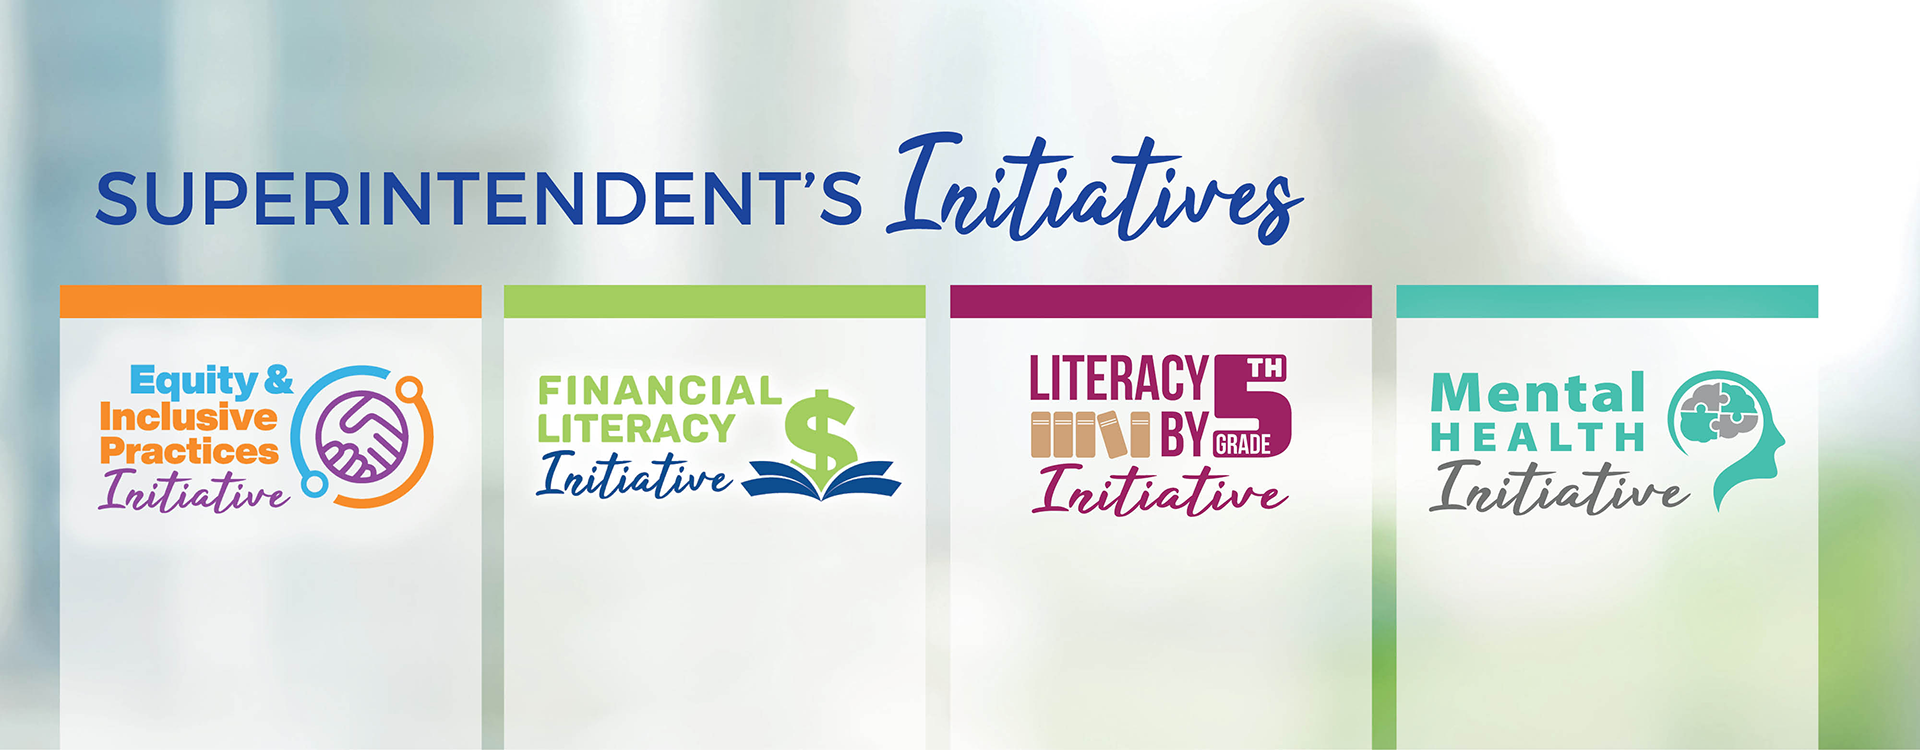 Superintendent's Initiatives. Equity and Inclusive Practices. Financial Literacy. Literacy by Fifth Grade. Mental Health.